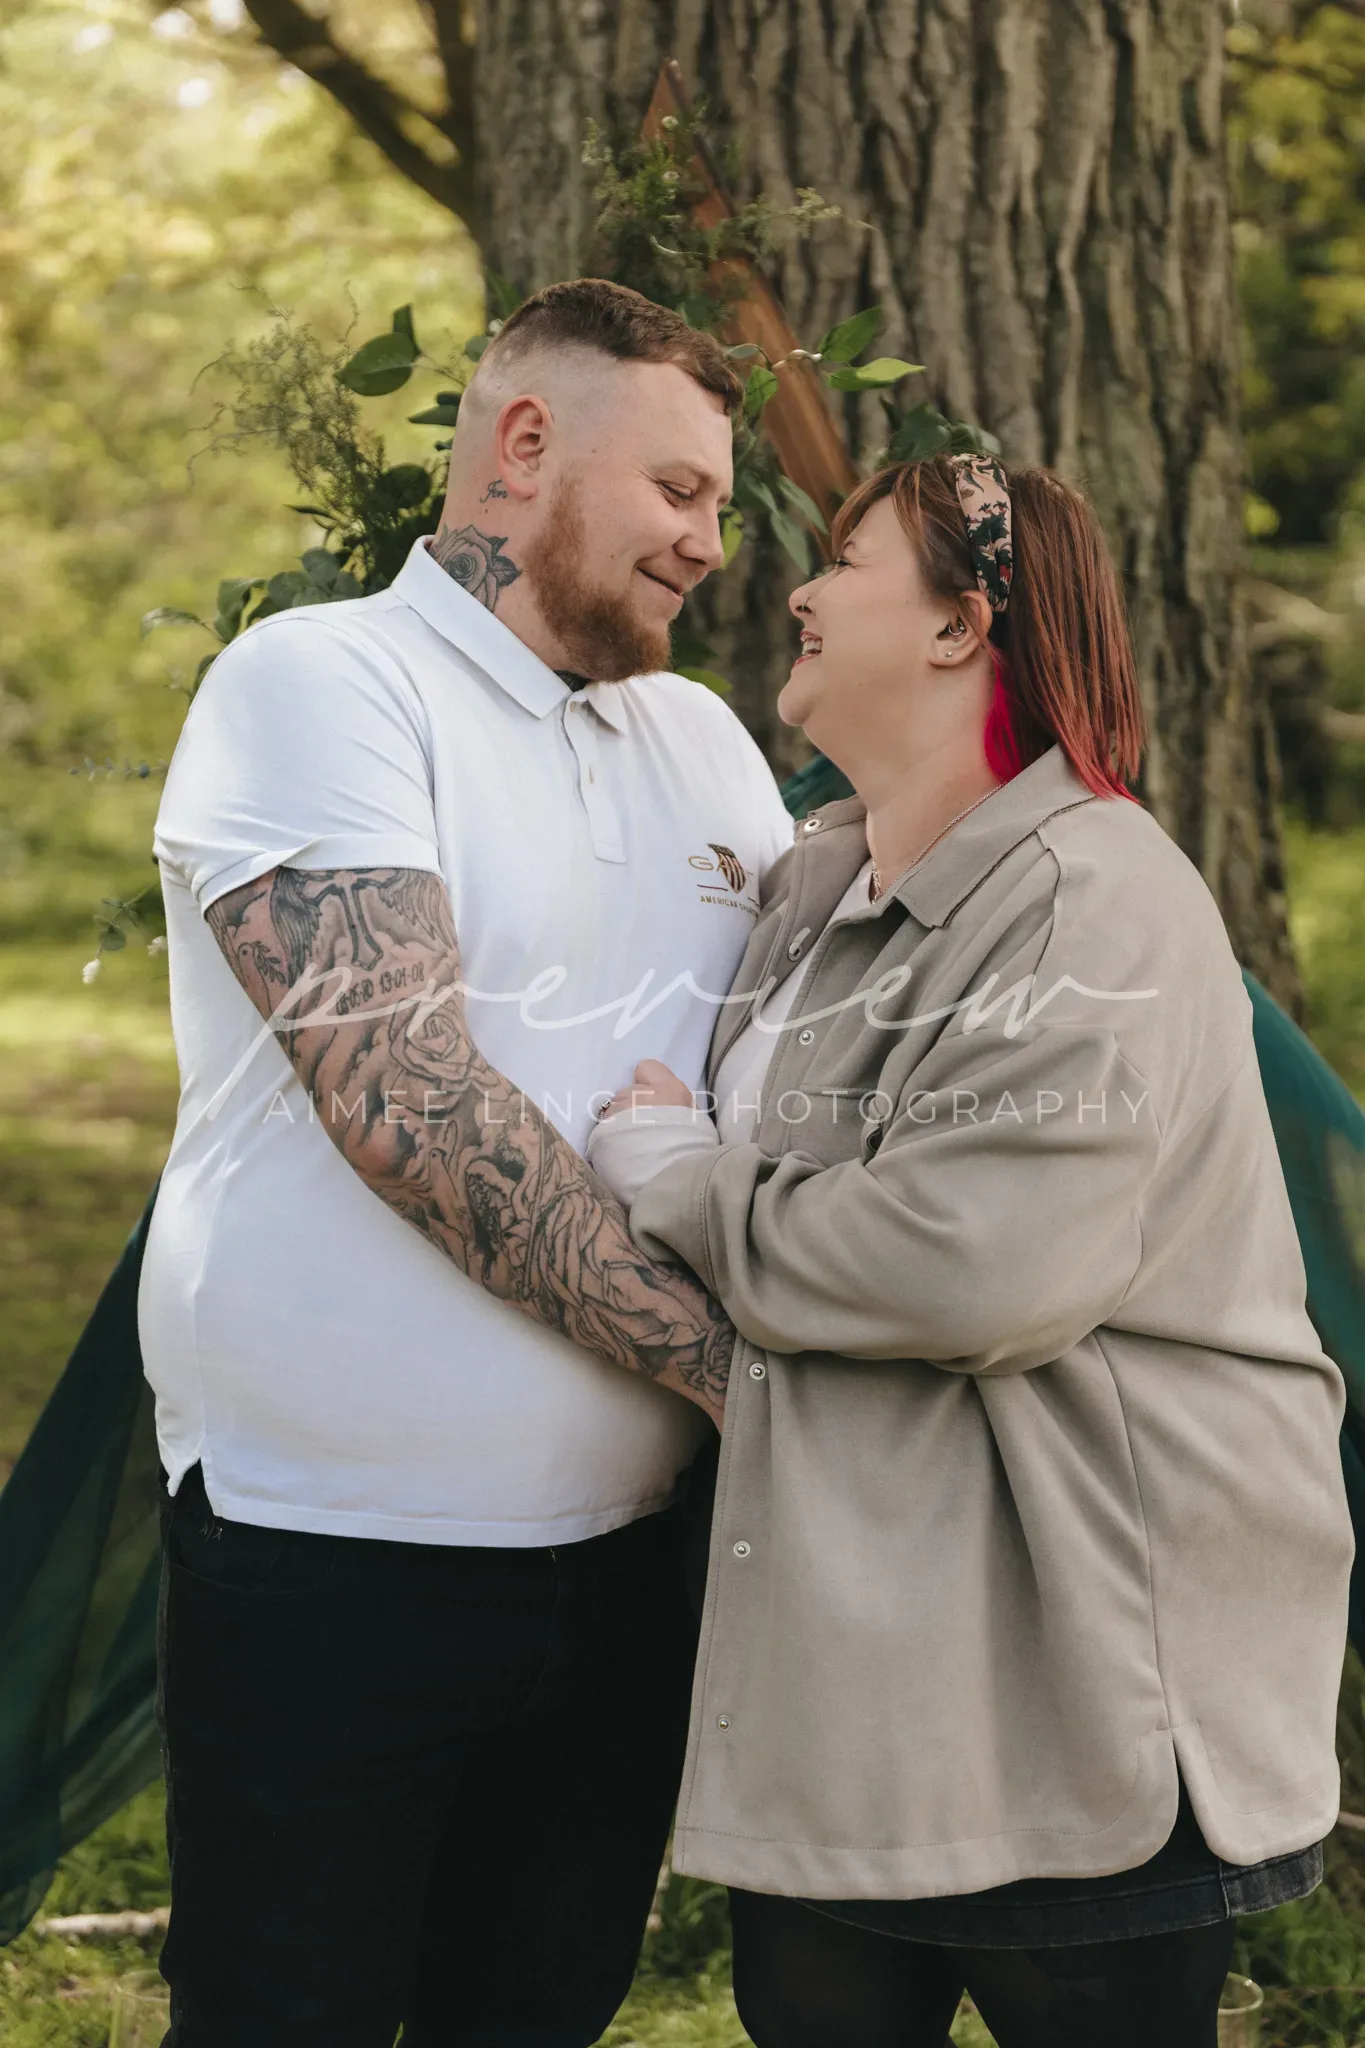 A happy family, a man and a woman named Gabrielle, share a joyful moment outdoors. The man, with tattooed arms, smiles at Gabrielle who has red hair and glasses; they stand